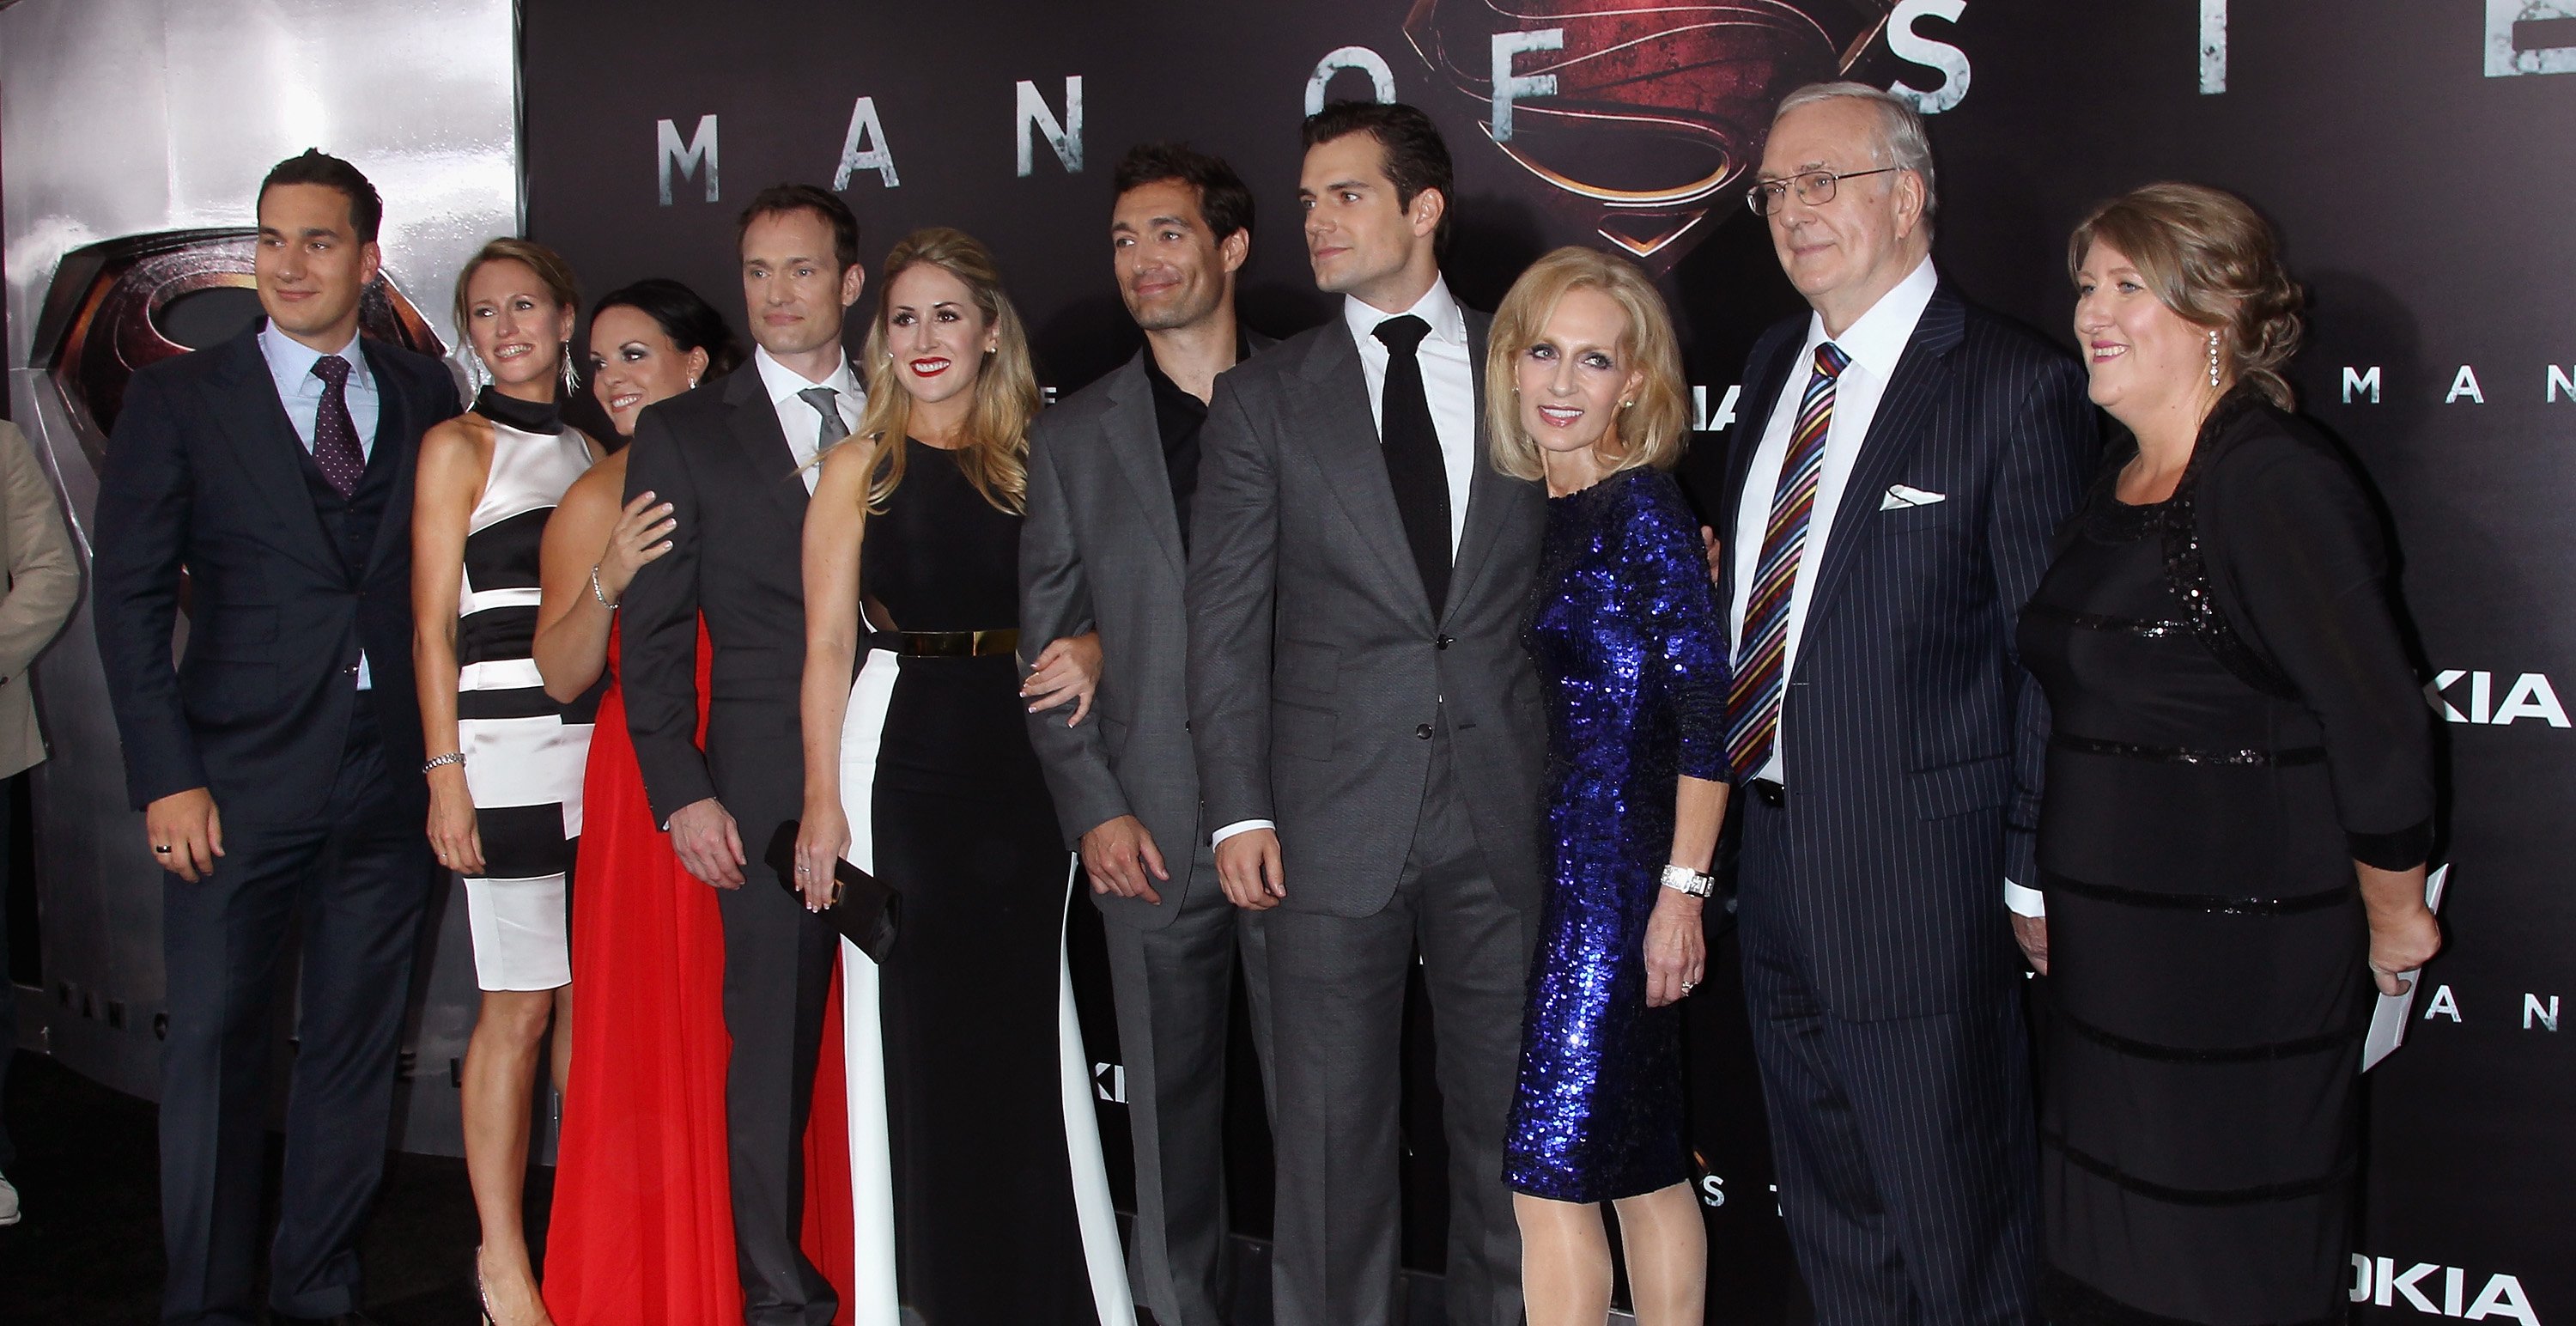 Actor Henry Cavill (4th from right) and family attends the "Man Of Steel" World Premiere at Alice Tully Hall at Lincoln Center on June 10, 2013, in New York City. | Source Getty Images